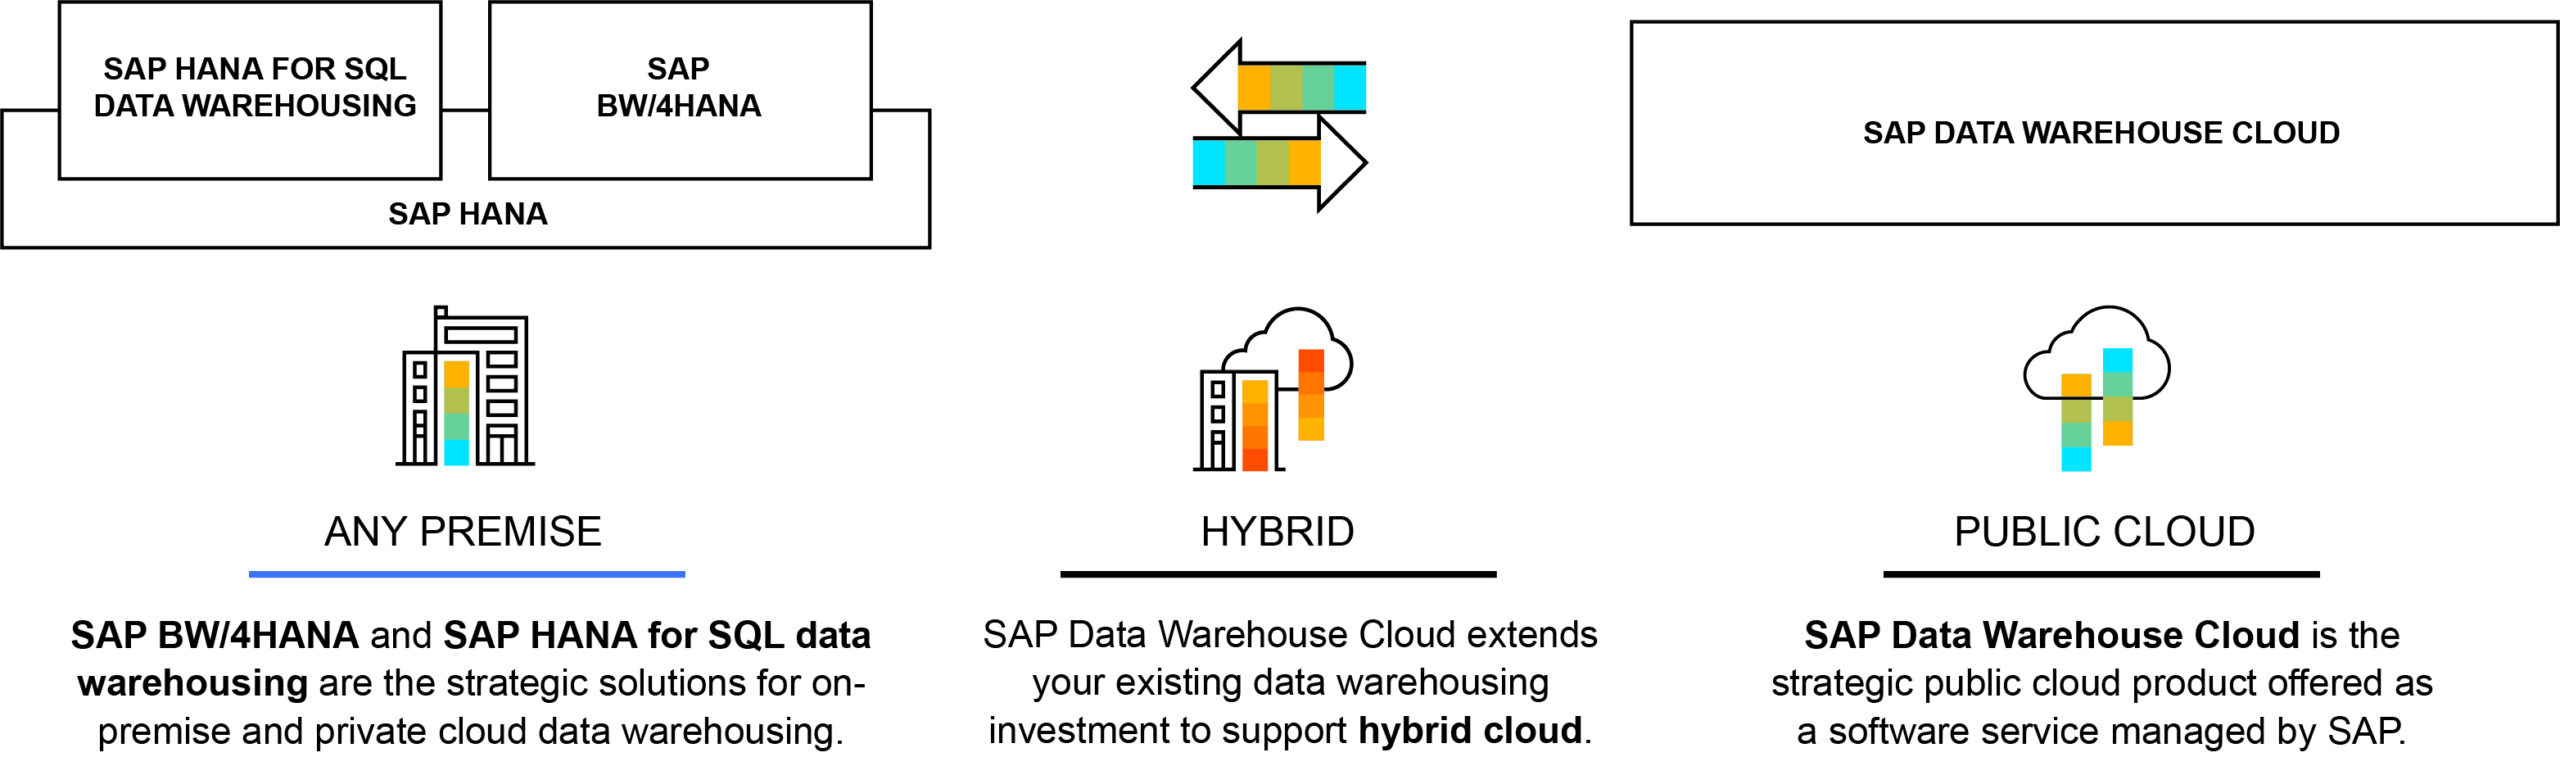 Figure 1 — SAP Data Warehouse Cloud can be used either standalone in the public cloud or as a complementary solution for SAP’s data warehouse portfolio in a hybrid scenario